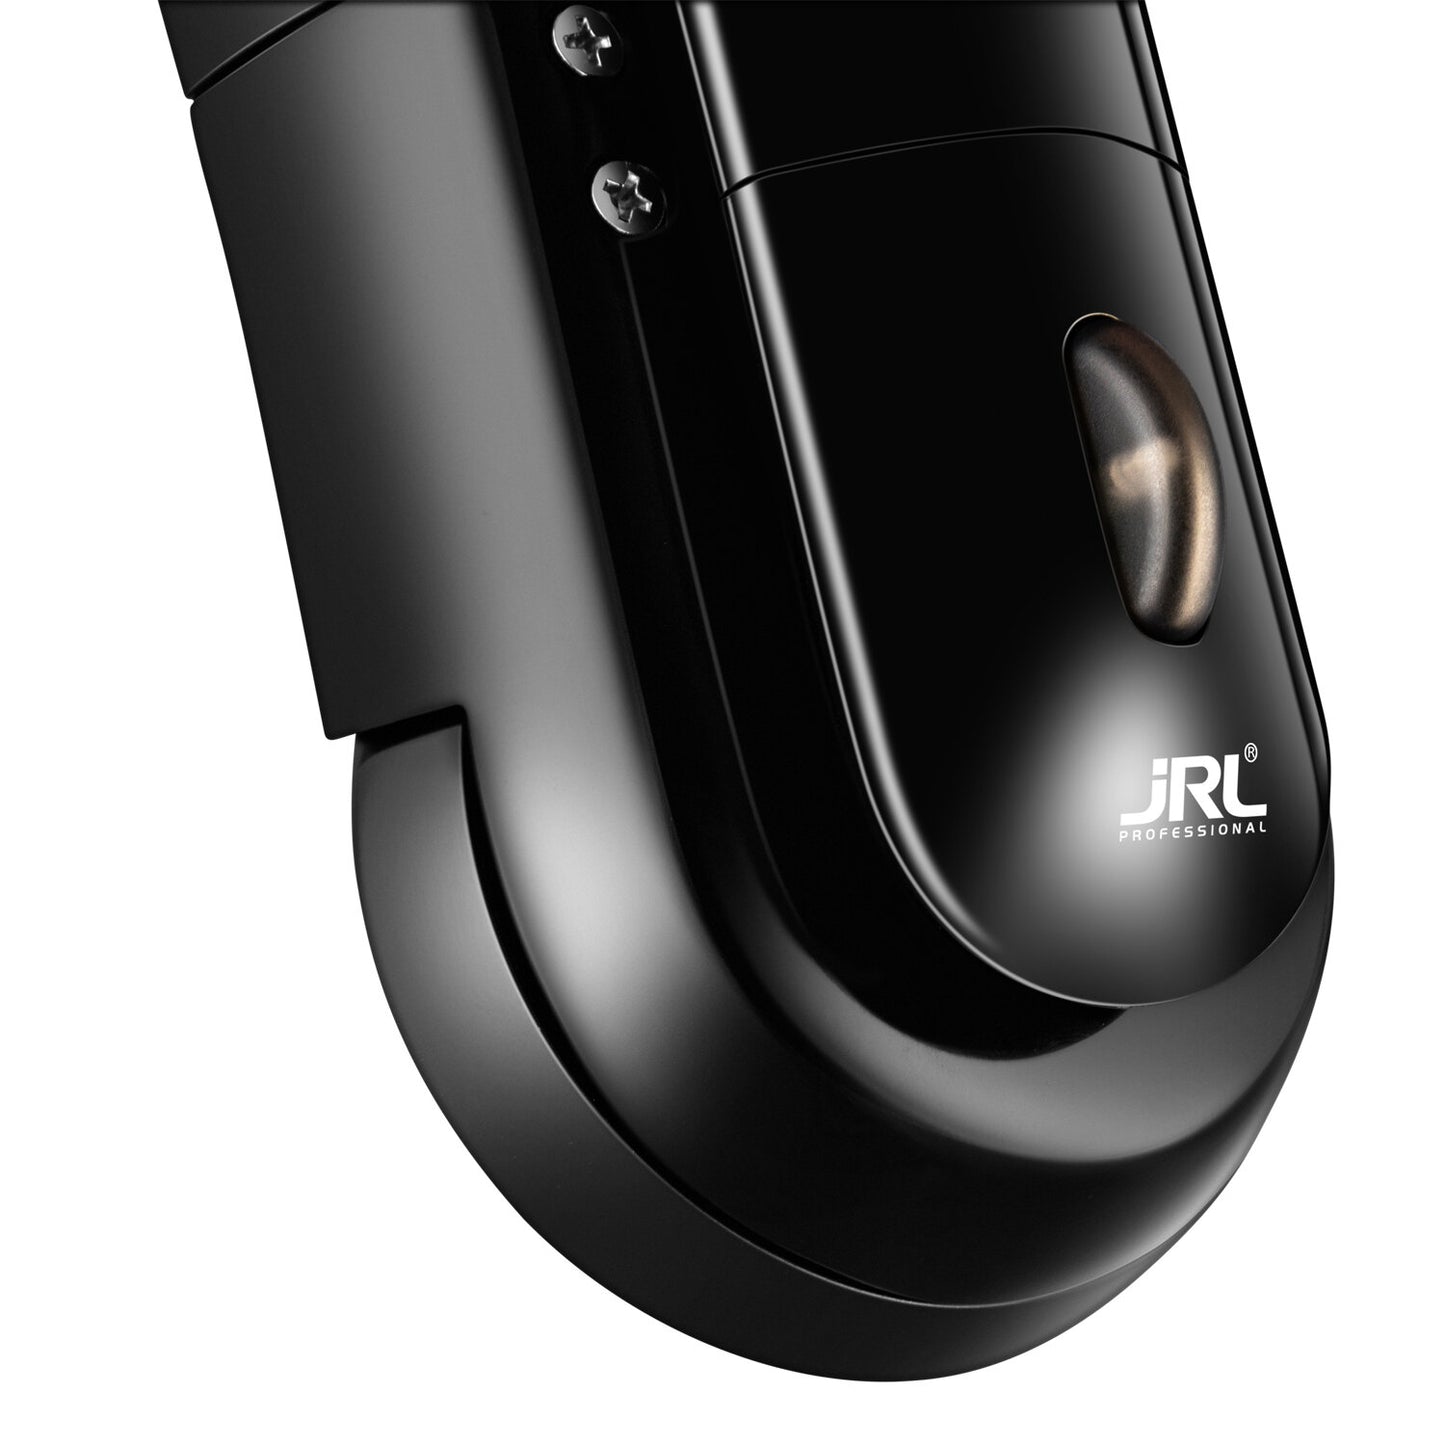 Load image into Gallery viewer, JRL Professional | Halo Hair Processor | Black |
